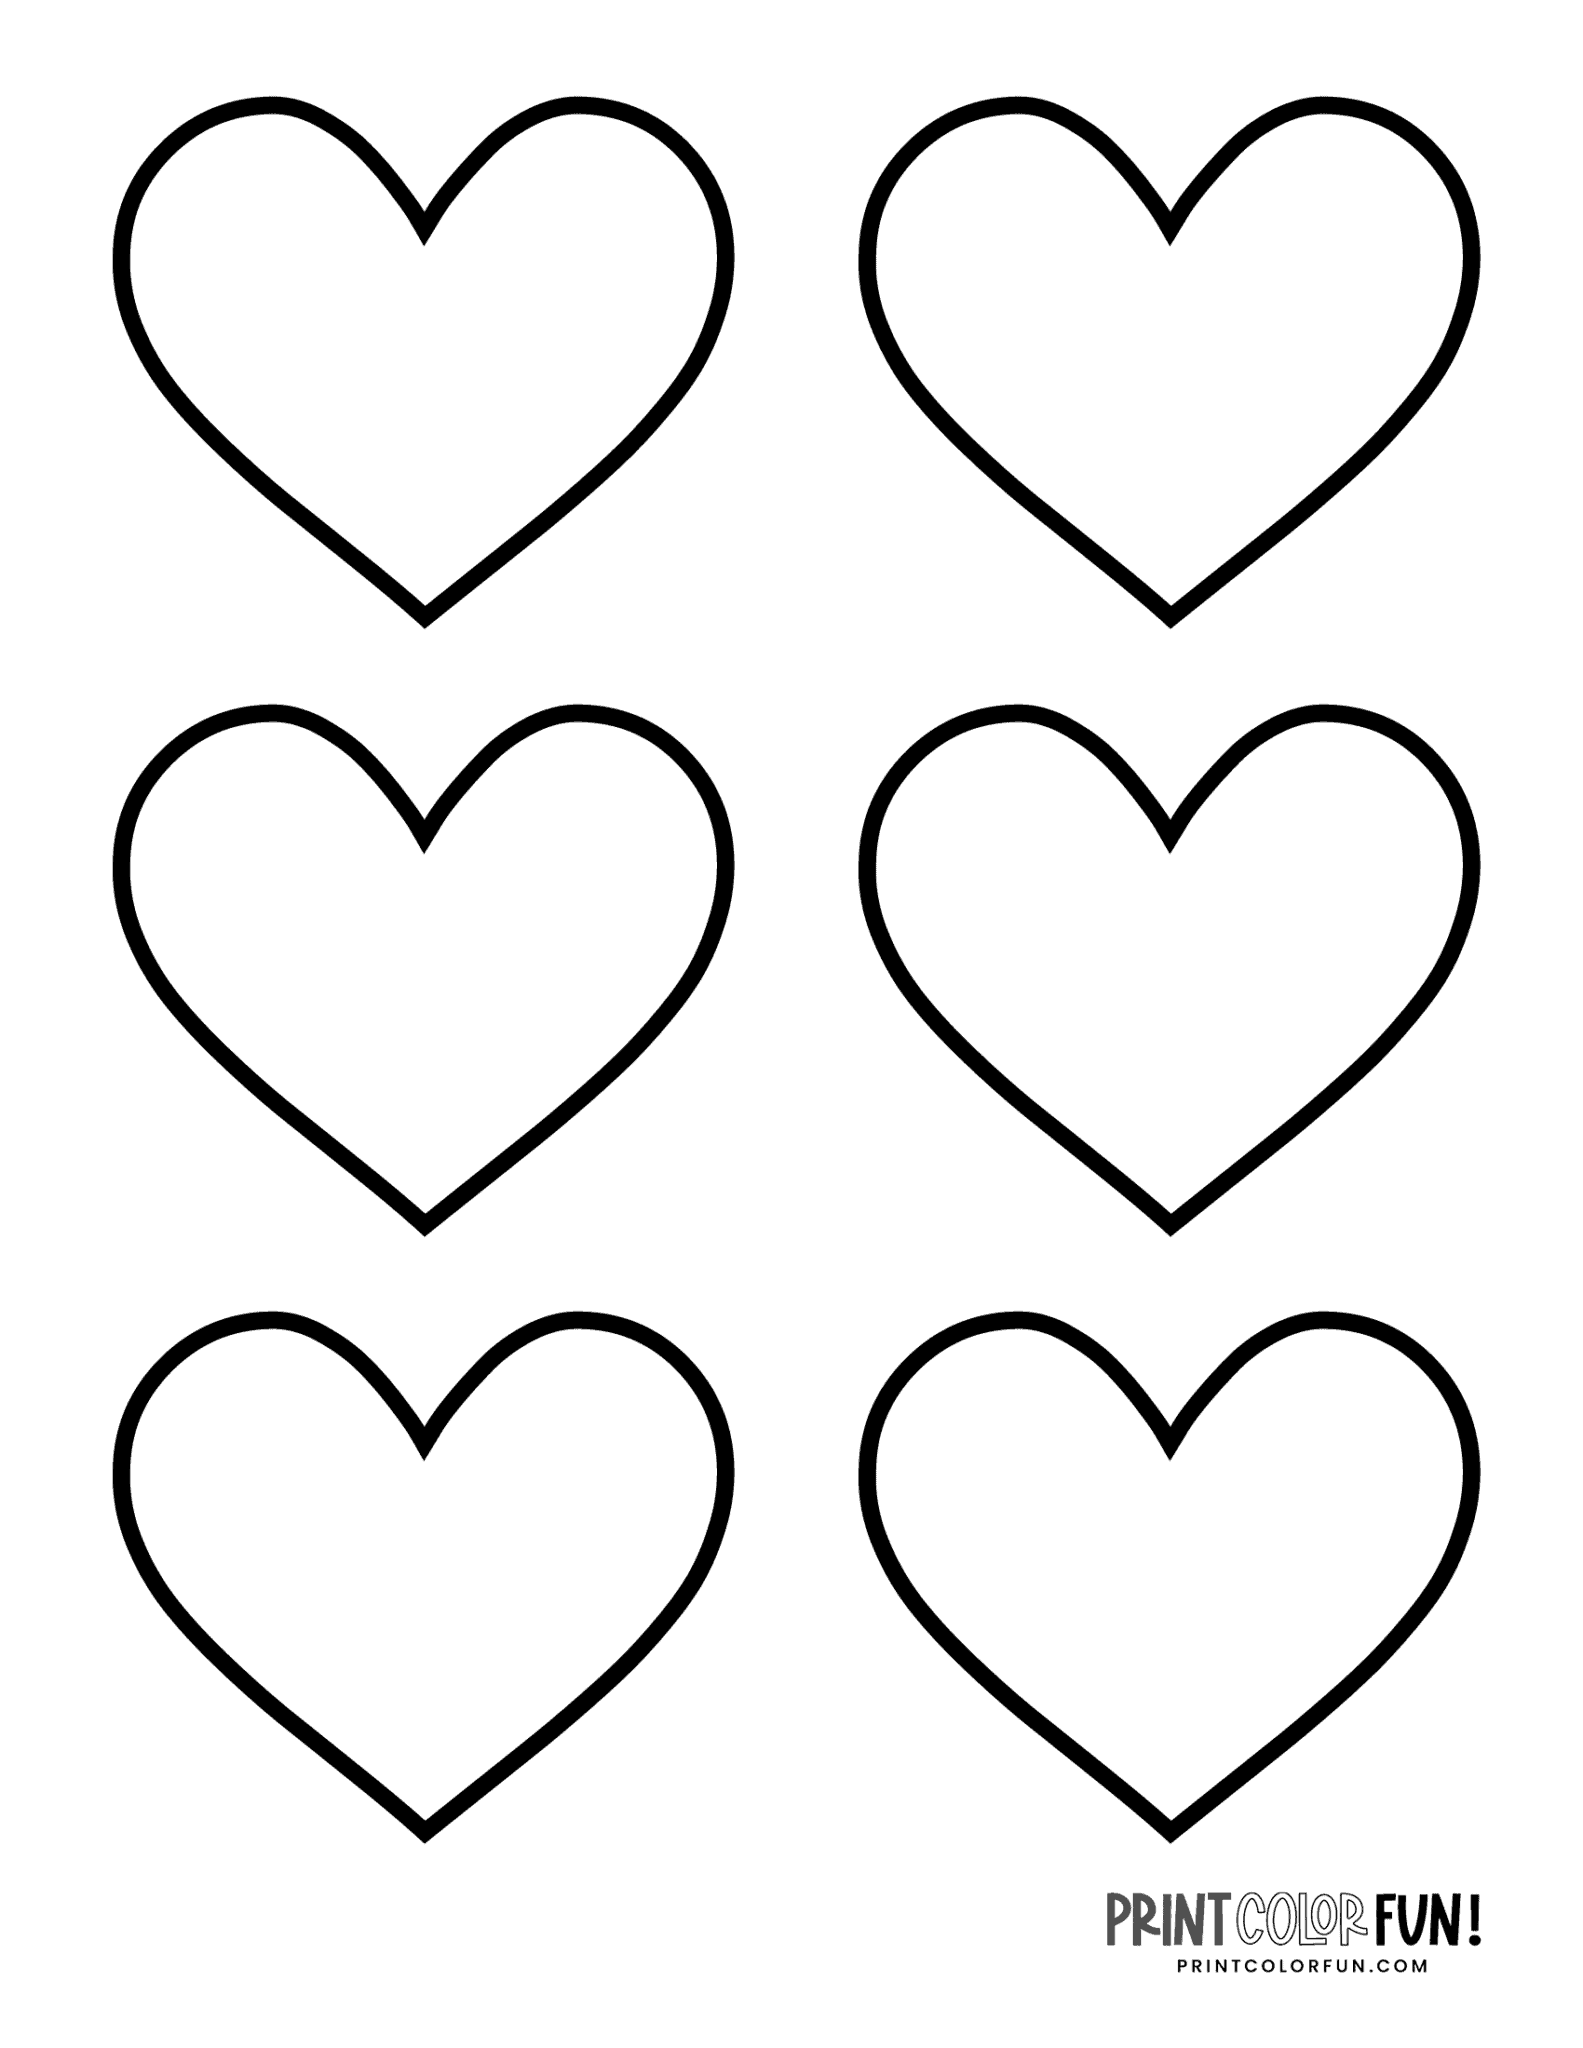 blank heart shape coloring pages crafty printables